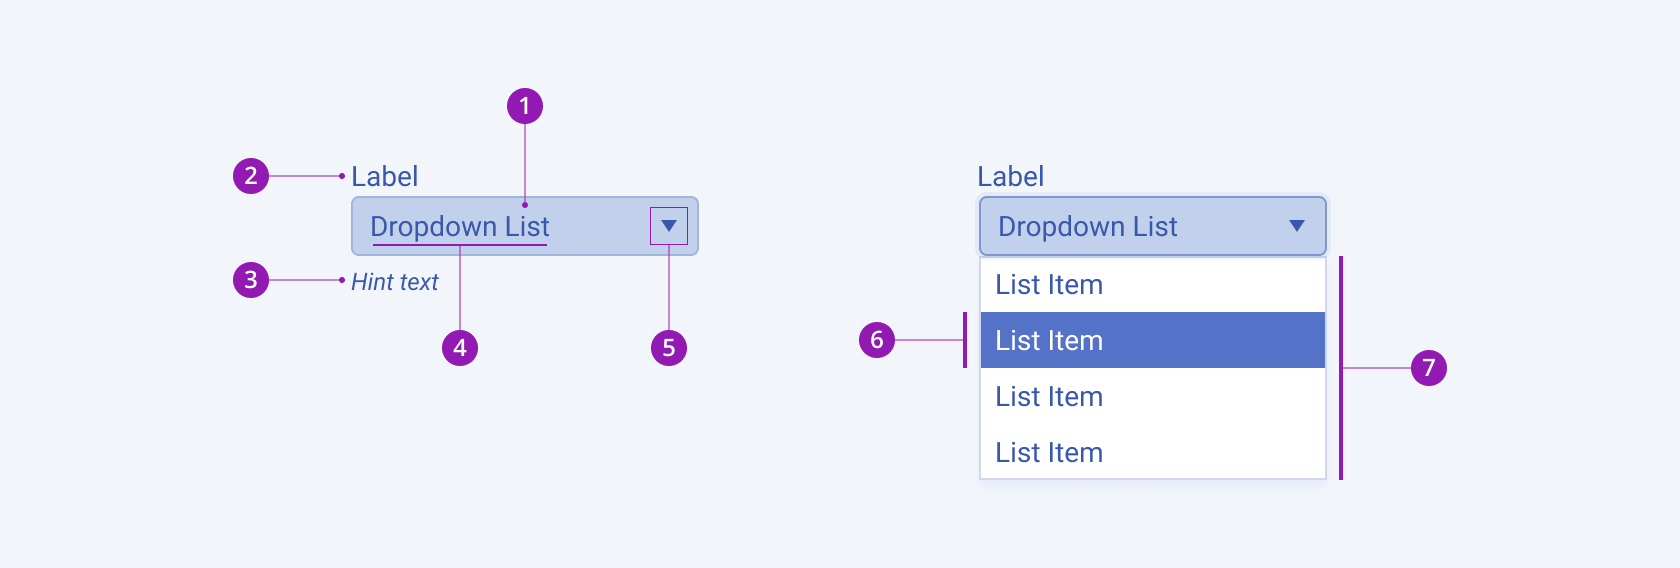 A Telerik and Kendo UI DropDownList component with the container, label, hint text, placeholder (preselected value), icon button, selected item, and drop-down list elements.